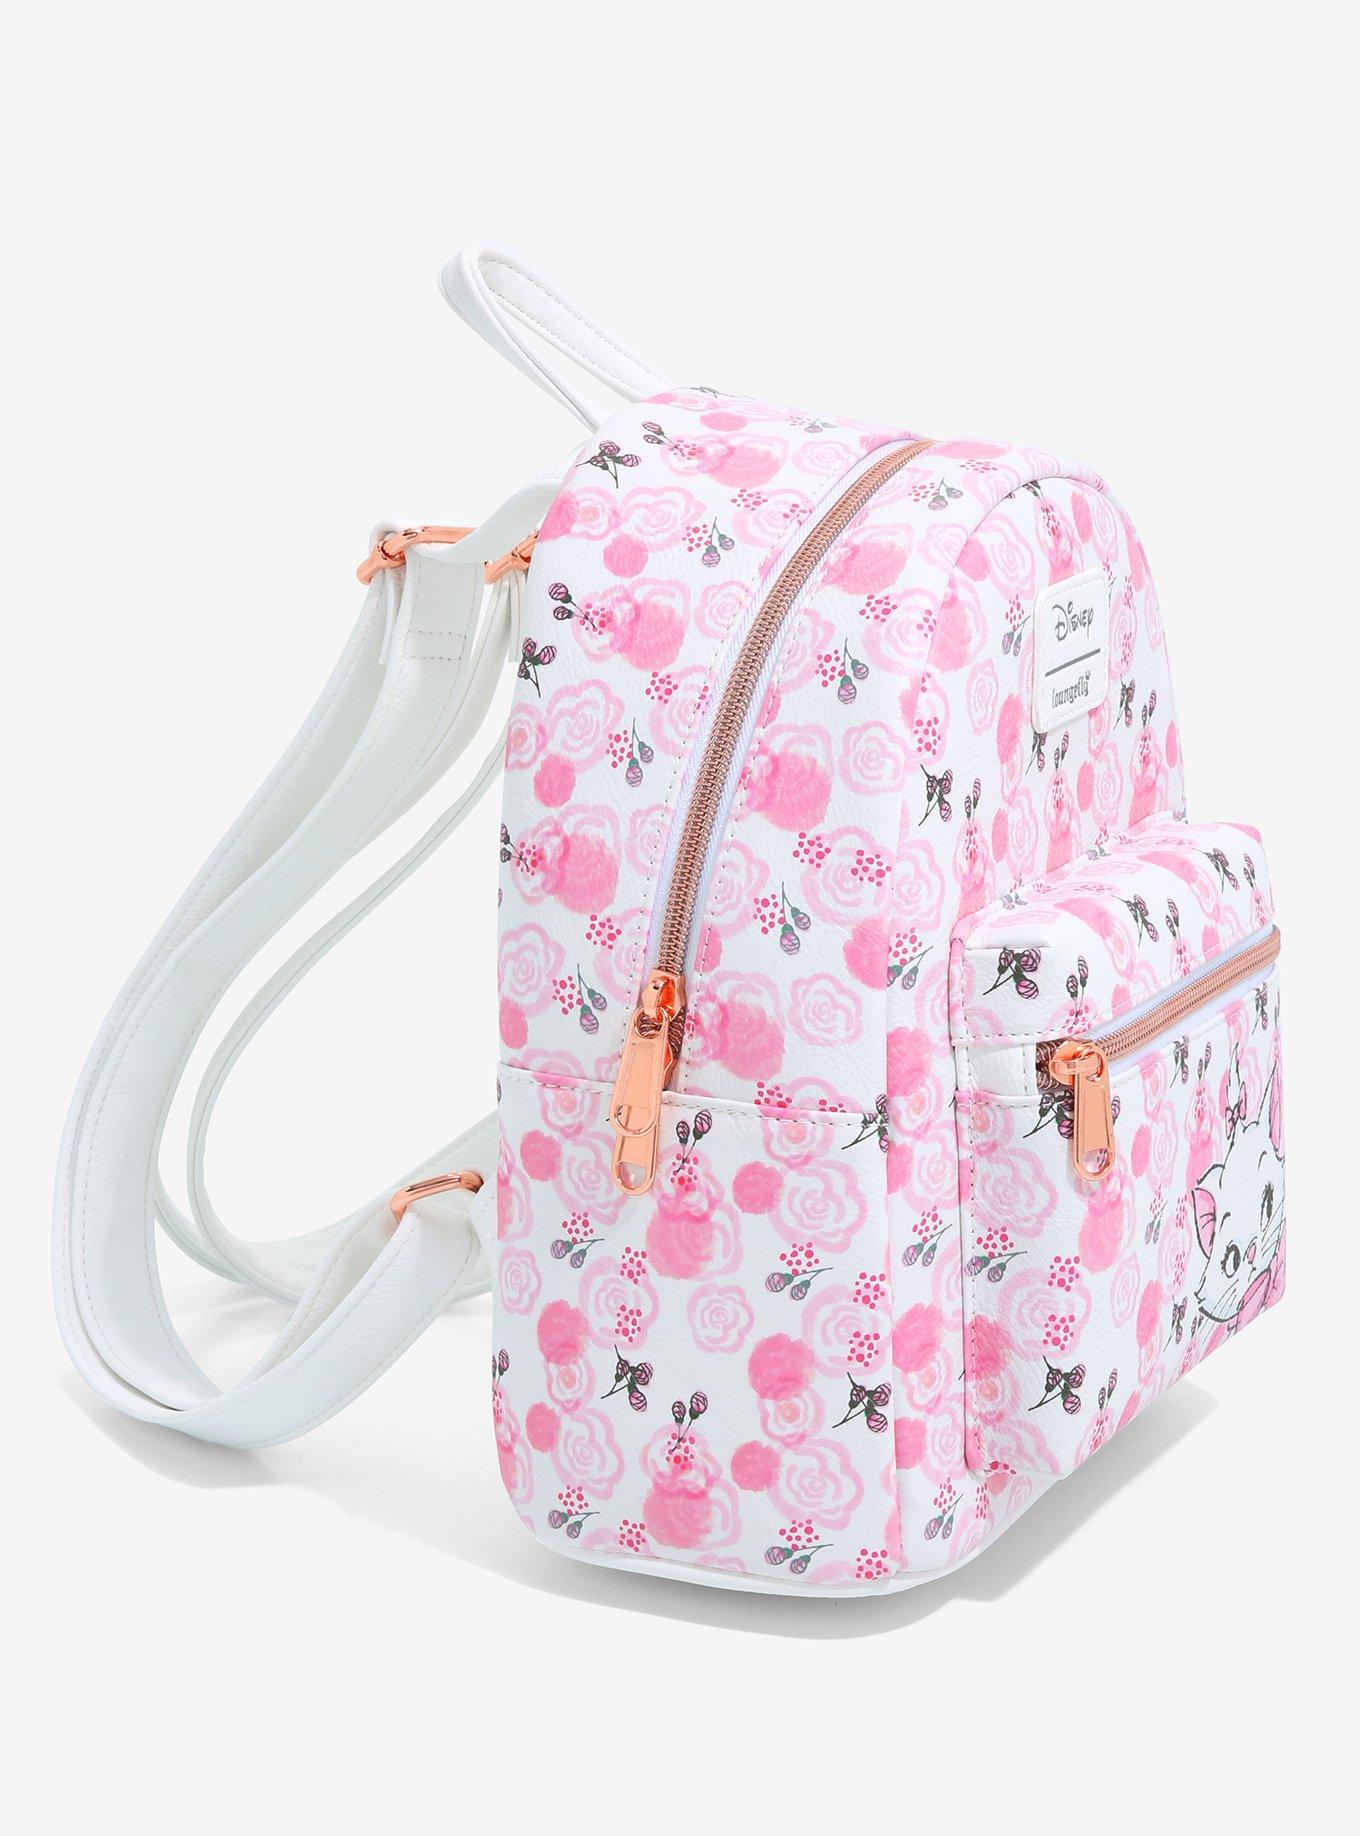 Loungefly Disney The Aristocats Marie Pink Floral Allover-Print Mini Fashion Handbag Backpack WDBK1287